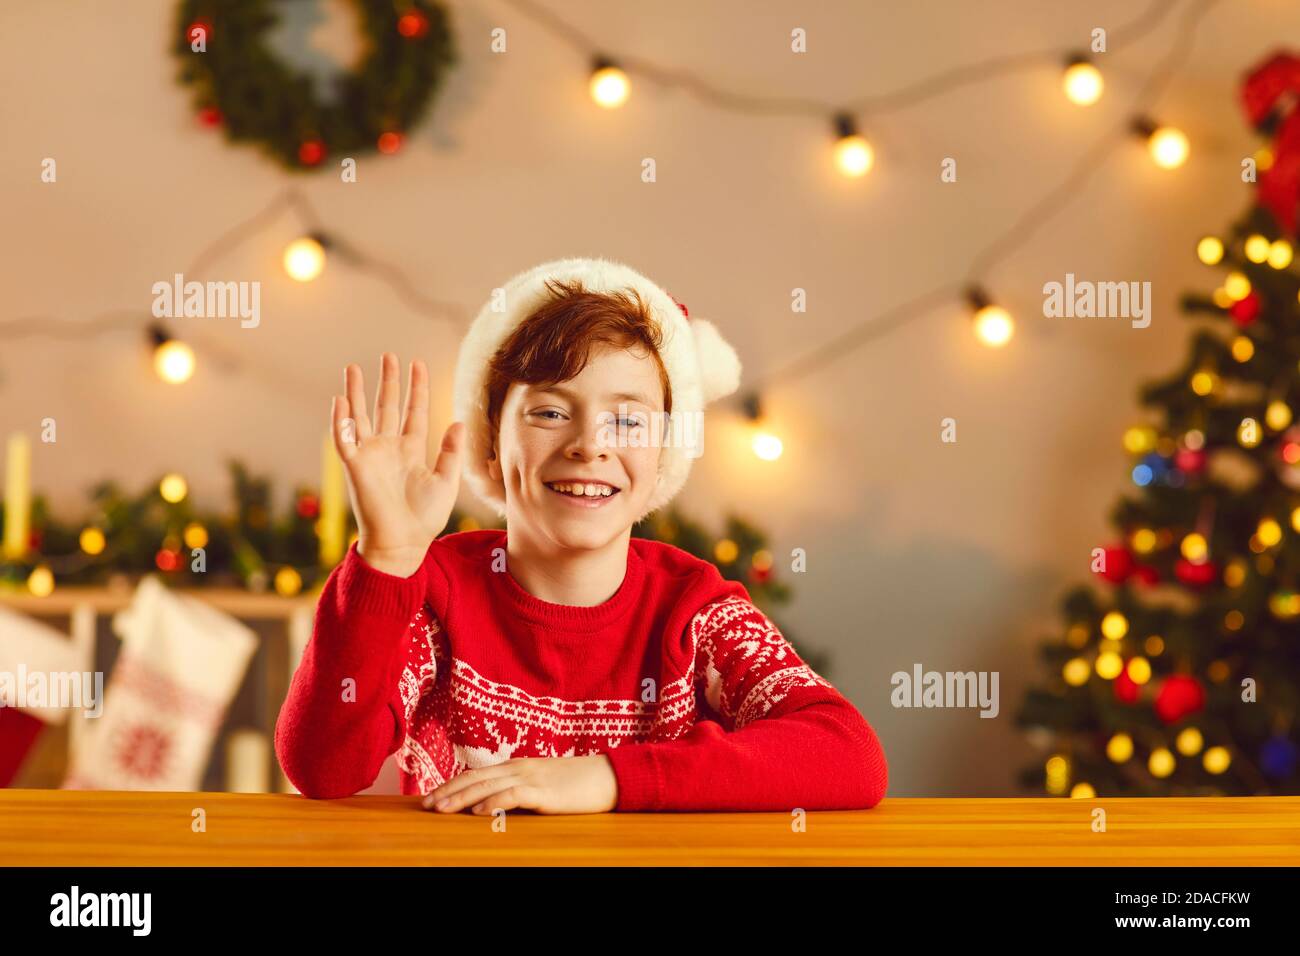 Happy boy smiling and waving hand saying hello during video call or Christmas live stream Stock Photo